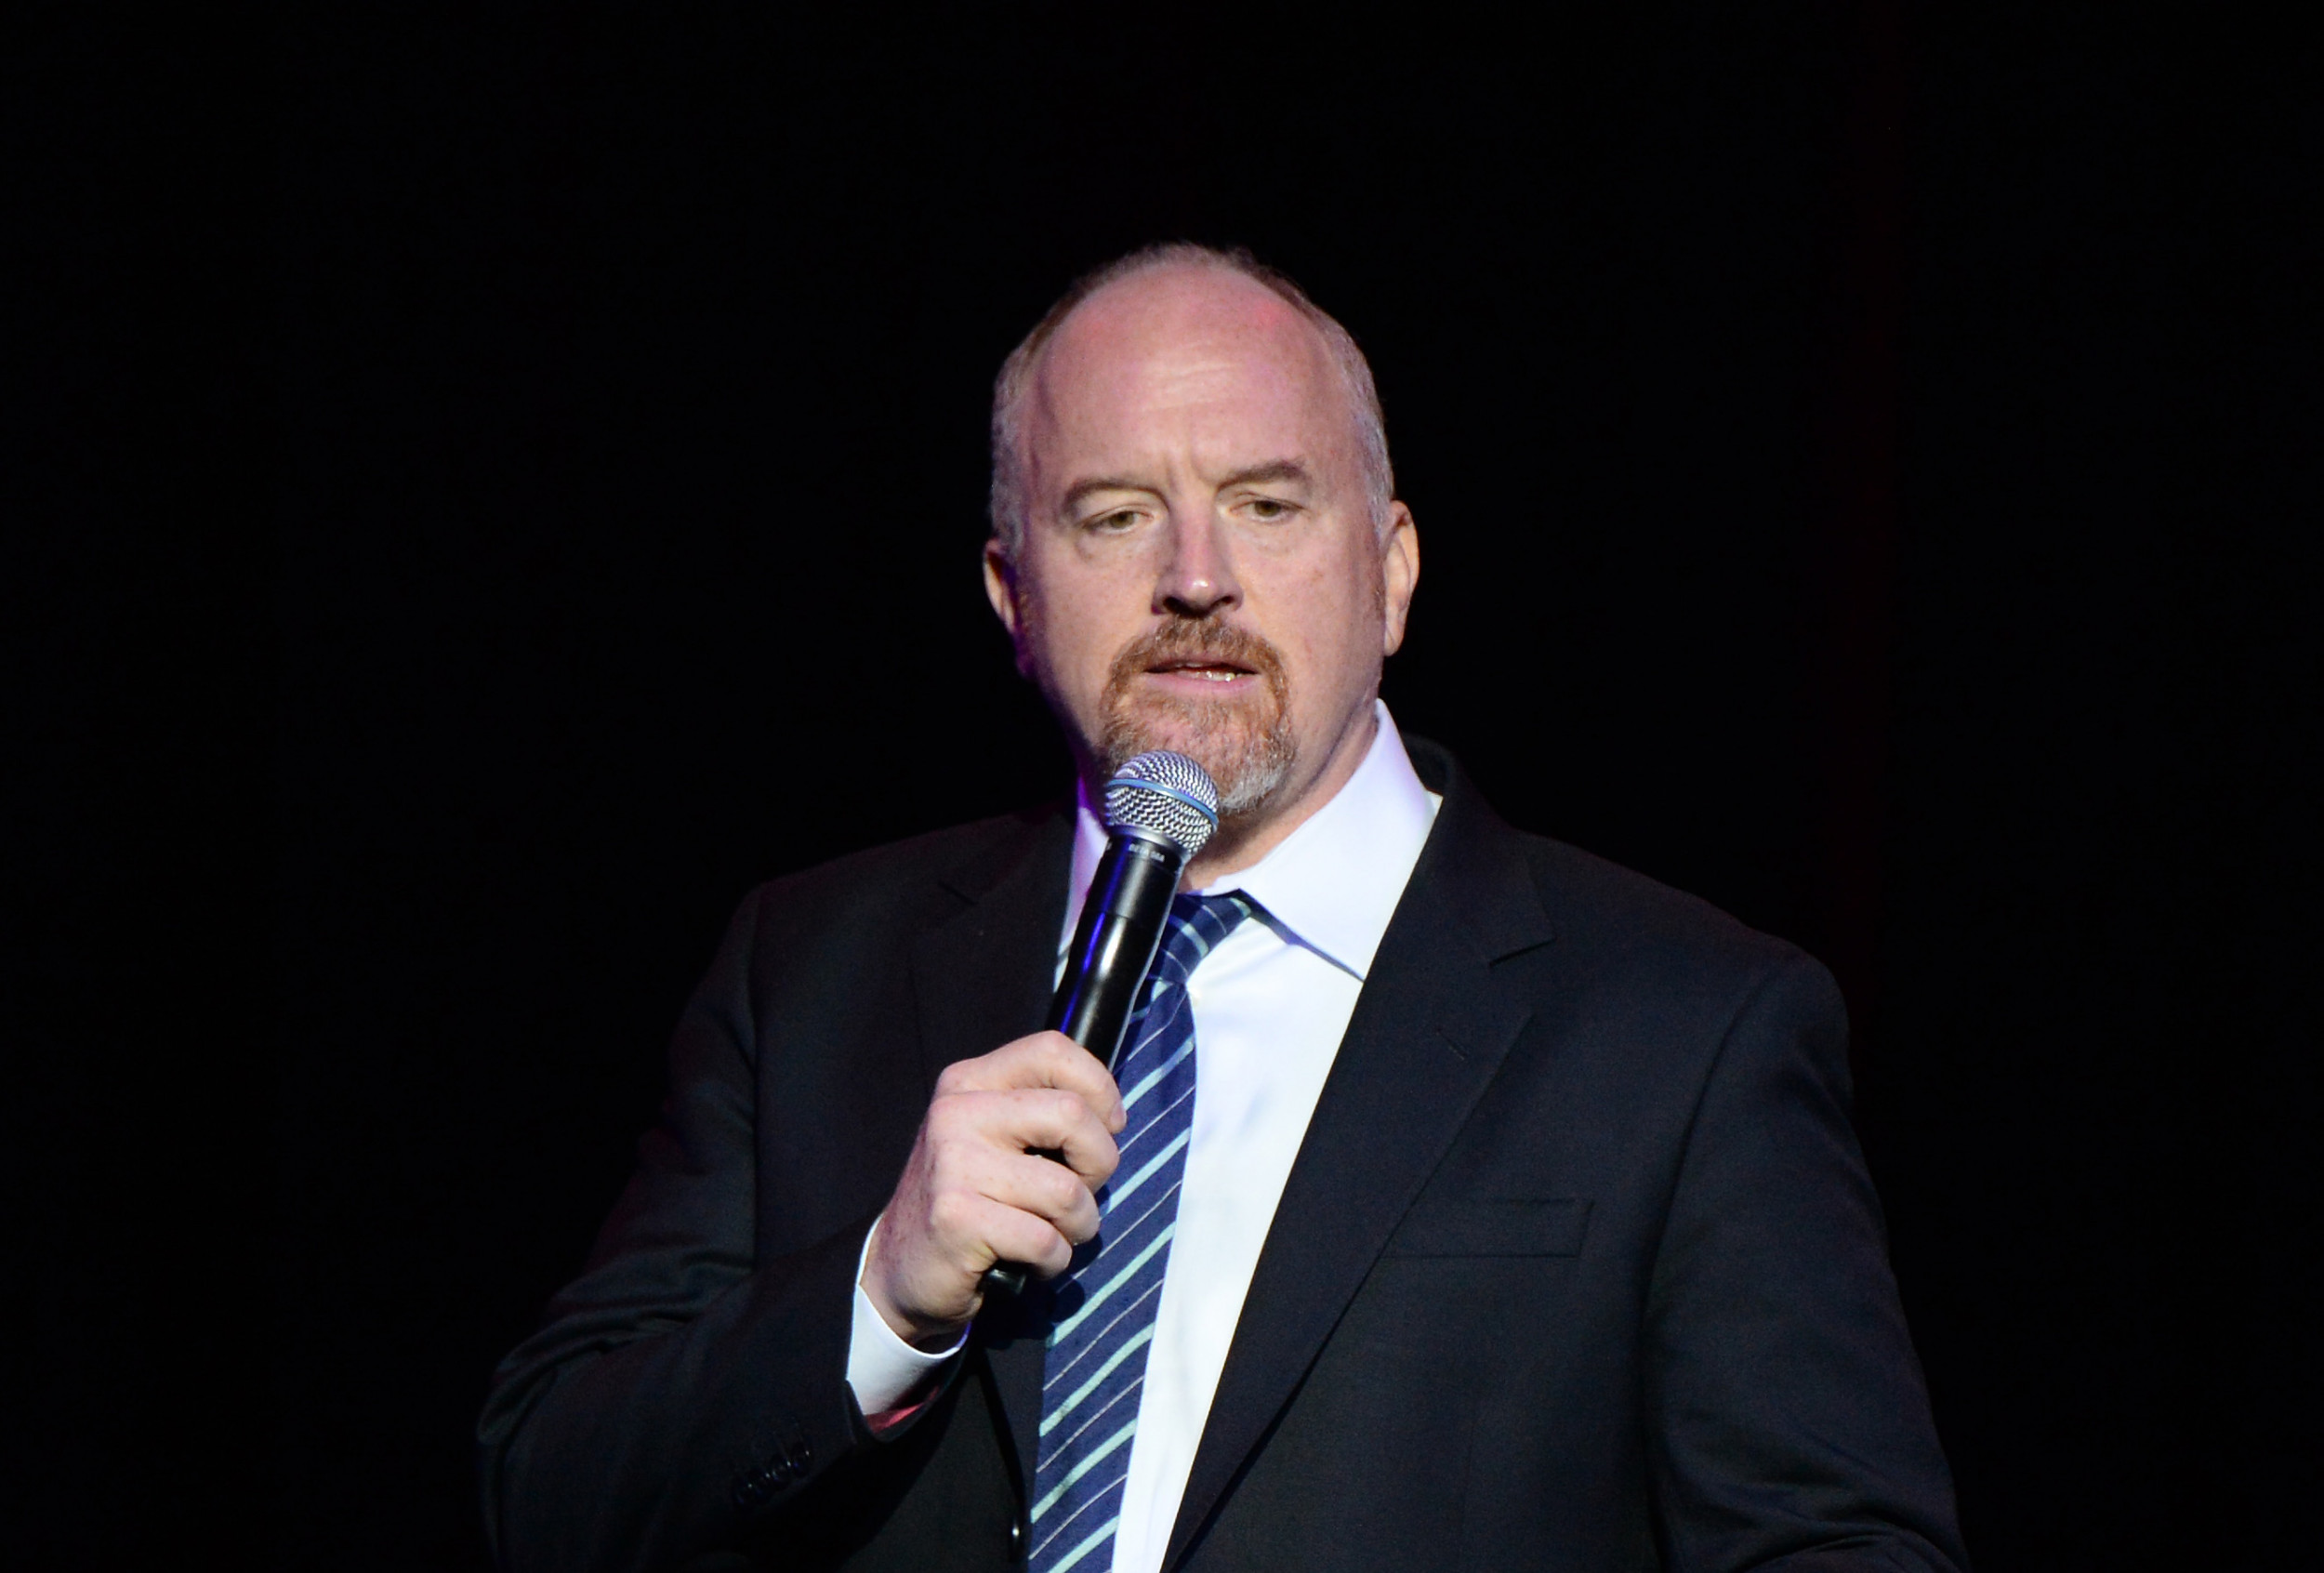 How to Watch Louis C.K.'s New Standup Special 'Sincerely Louis C.K.'